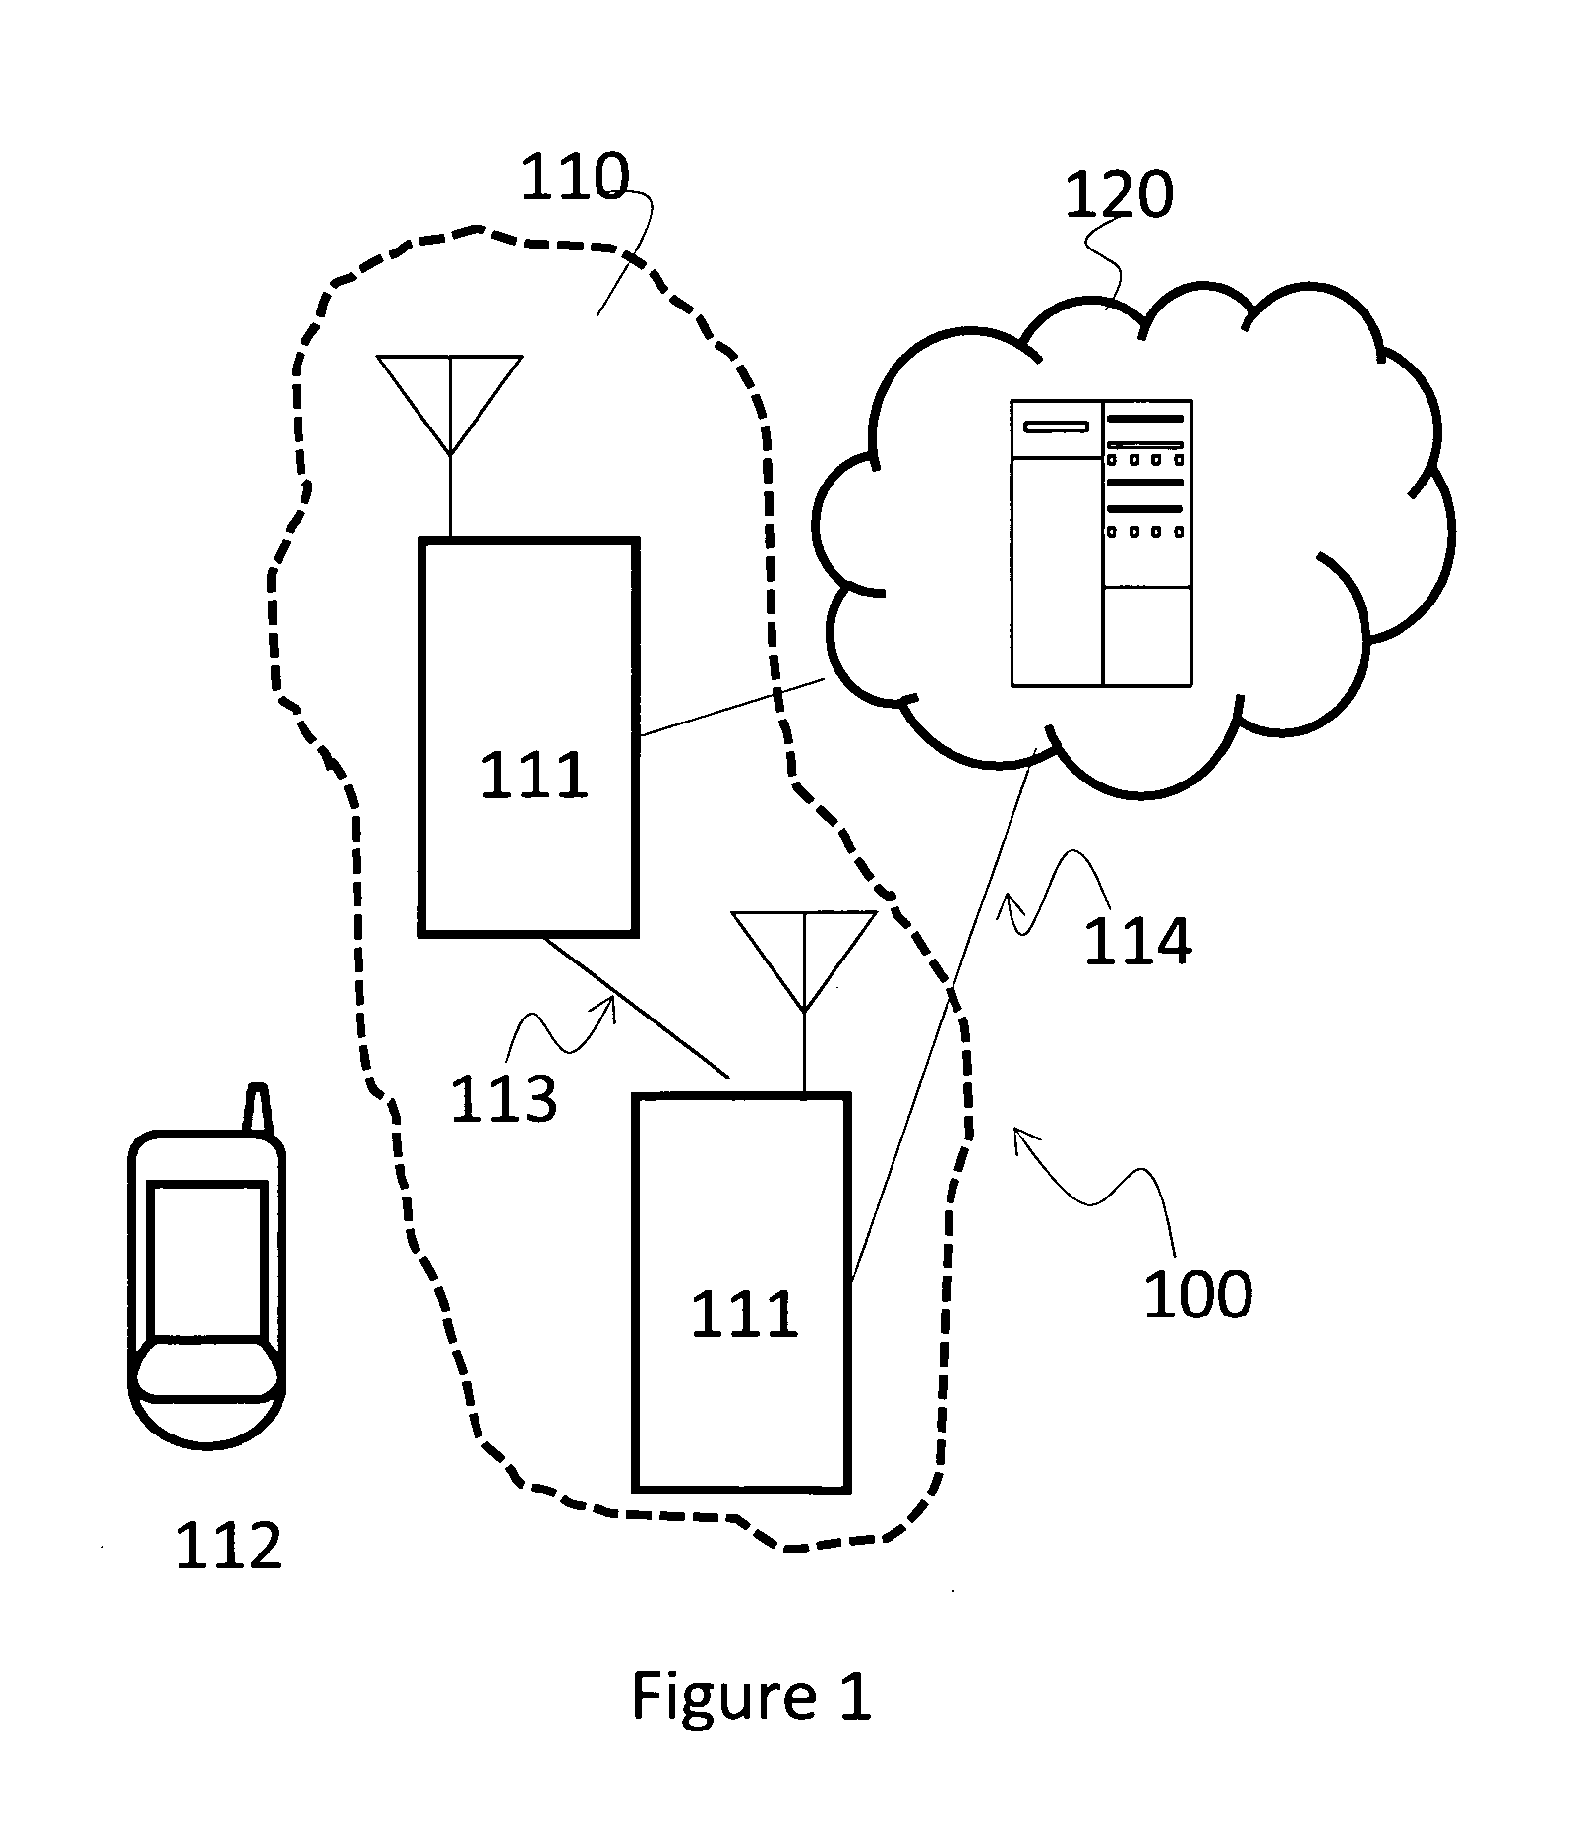 Method for data packet scheduling in a telecommunication network